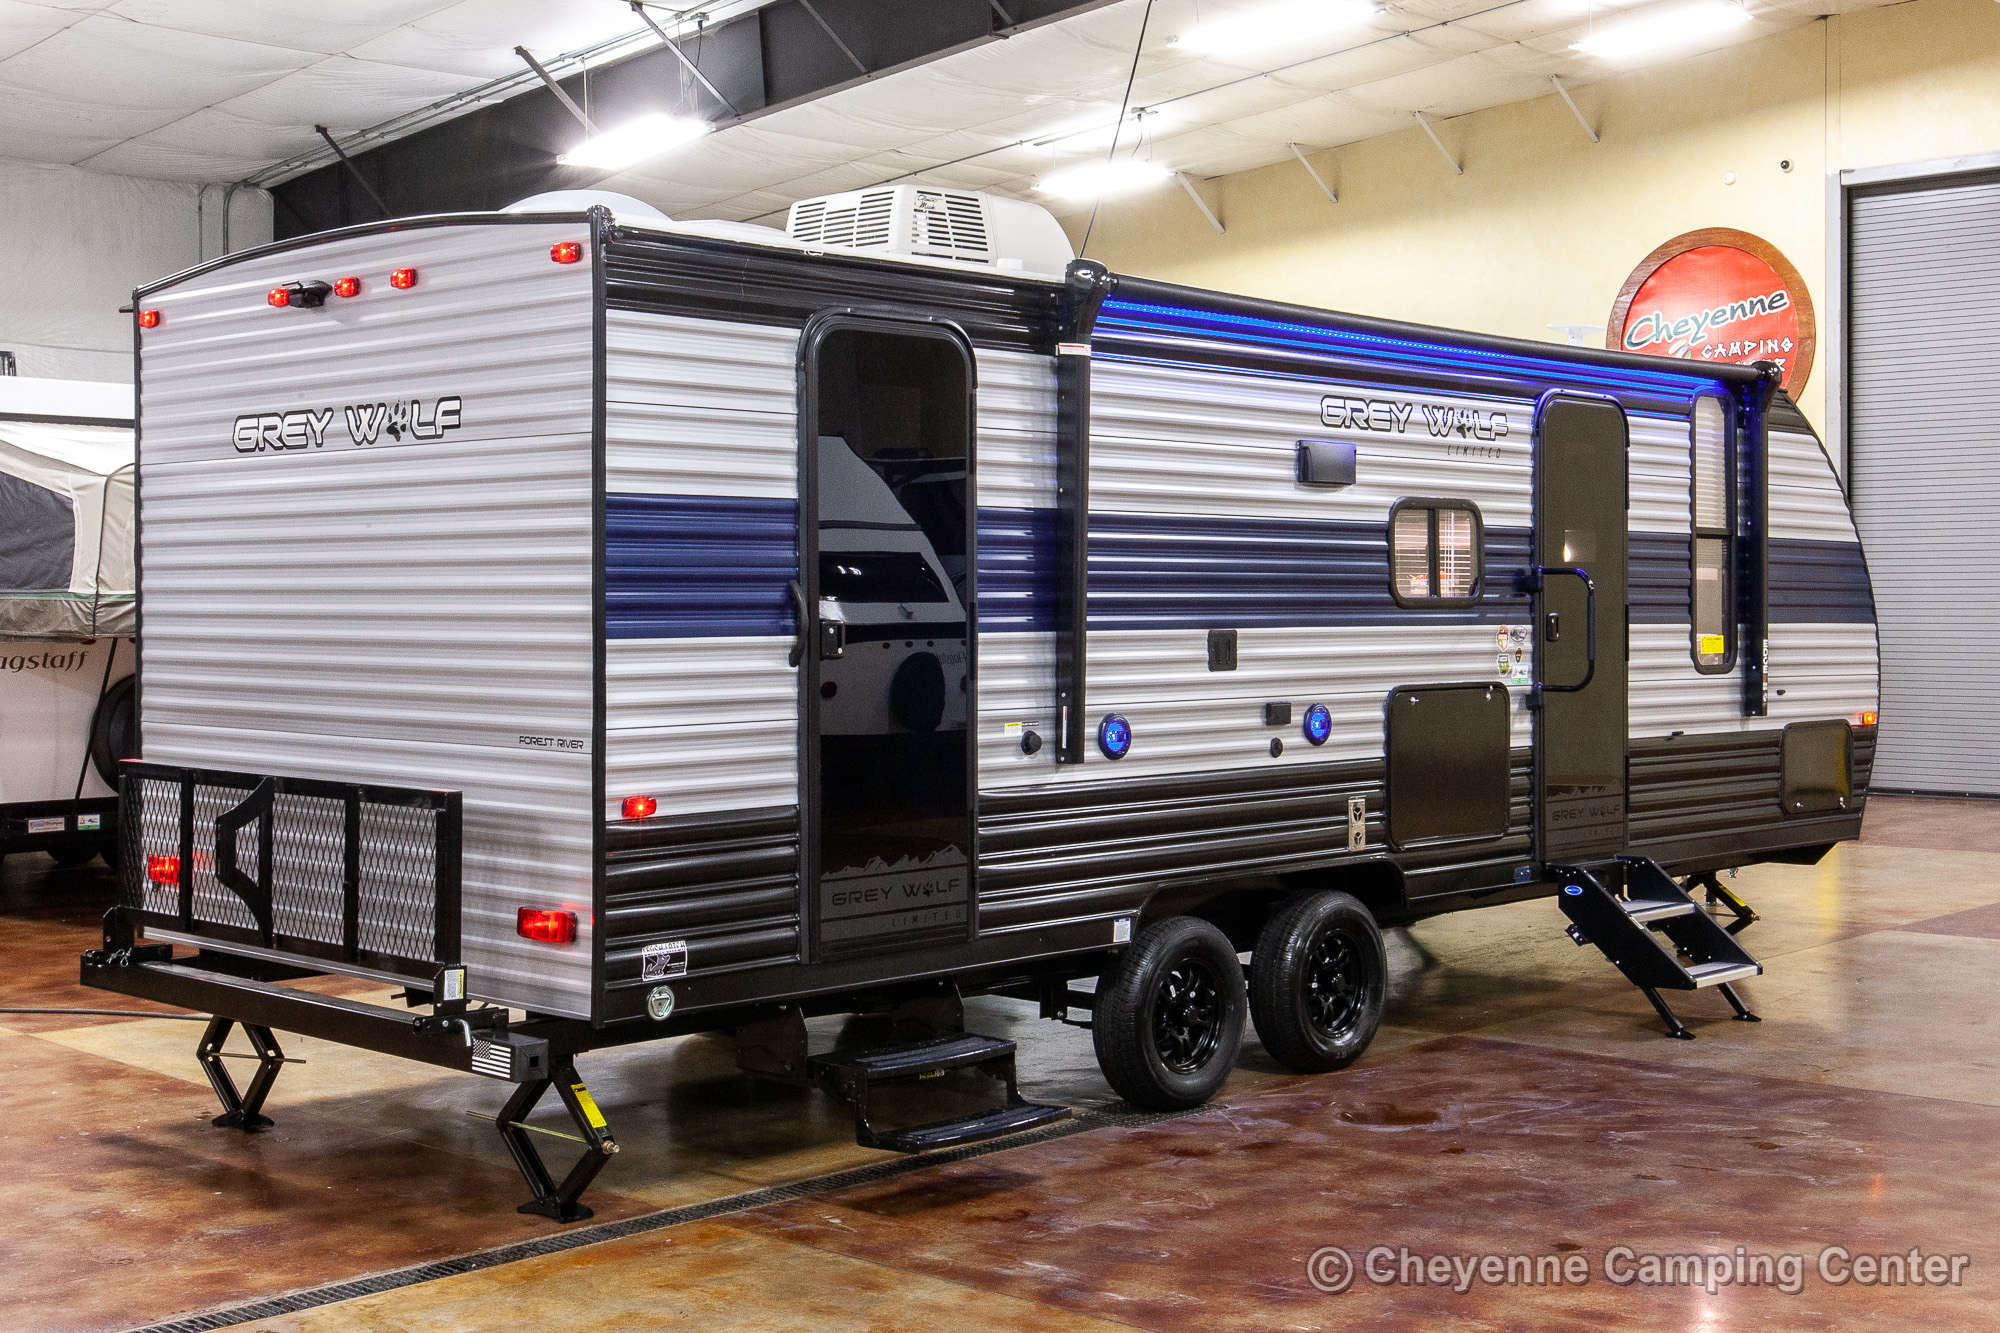 gray wolf travel trailers